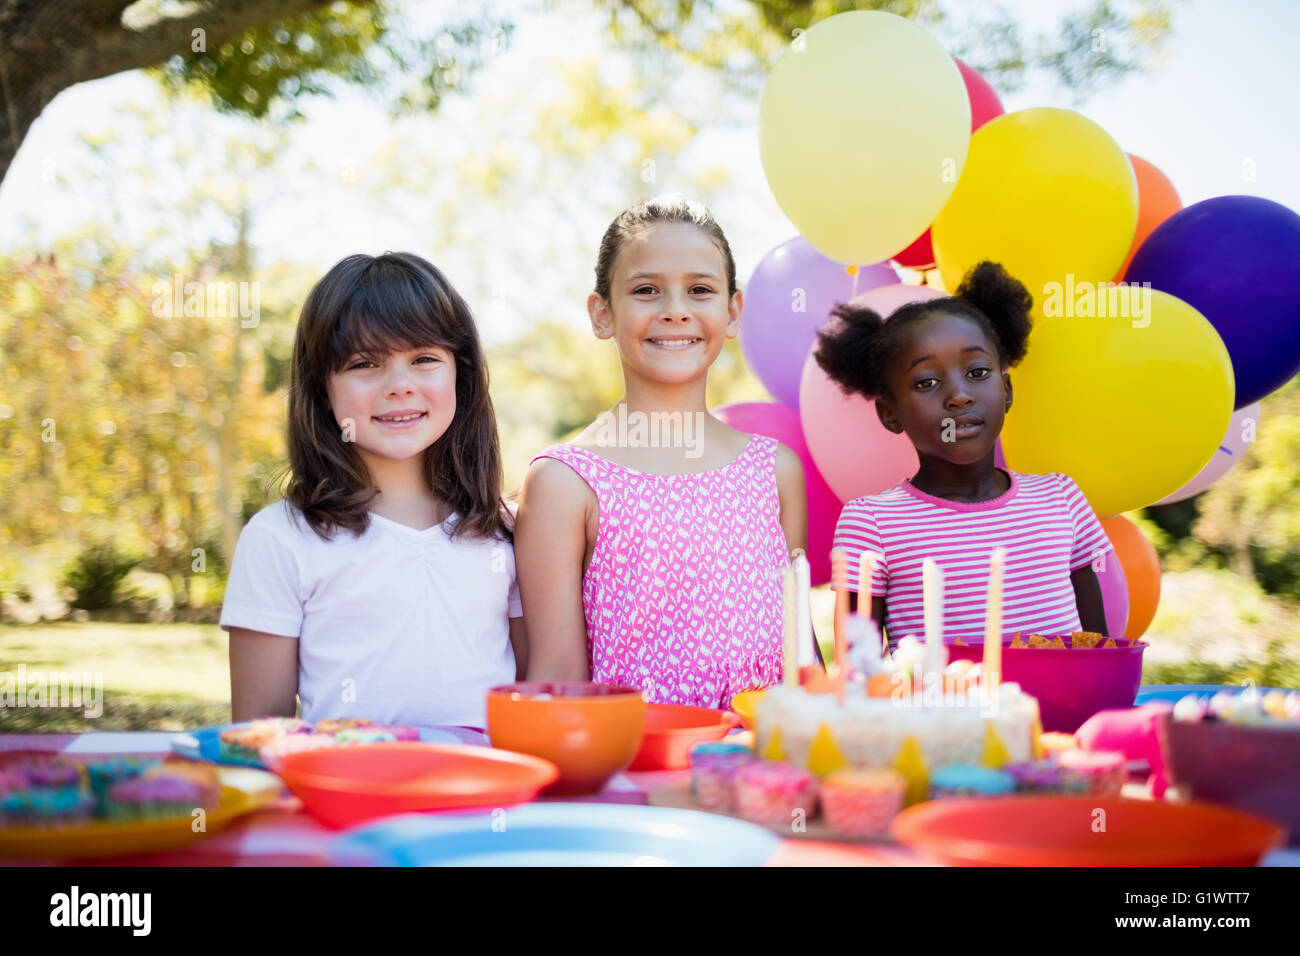 Cute girls smiling and posing during a birthday party Stock Photo